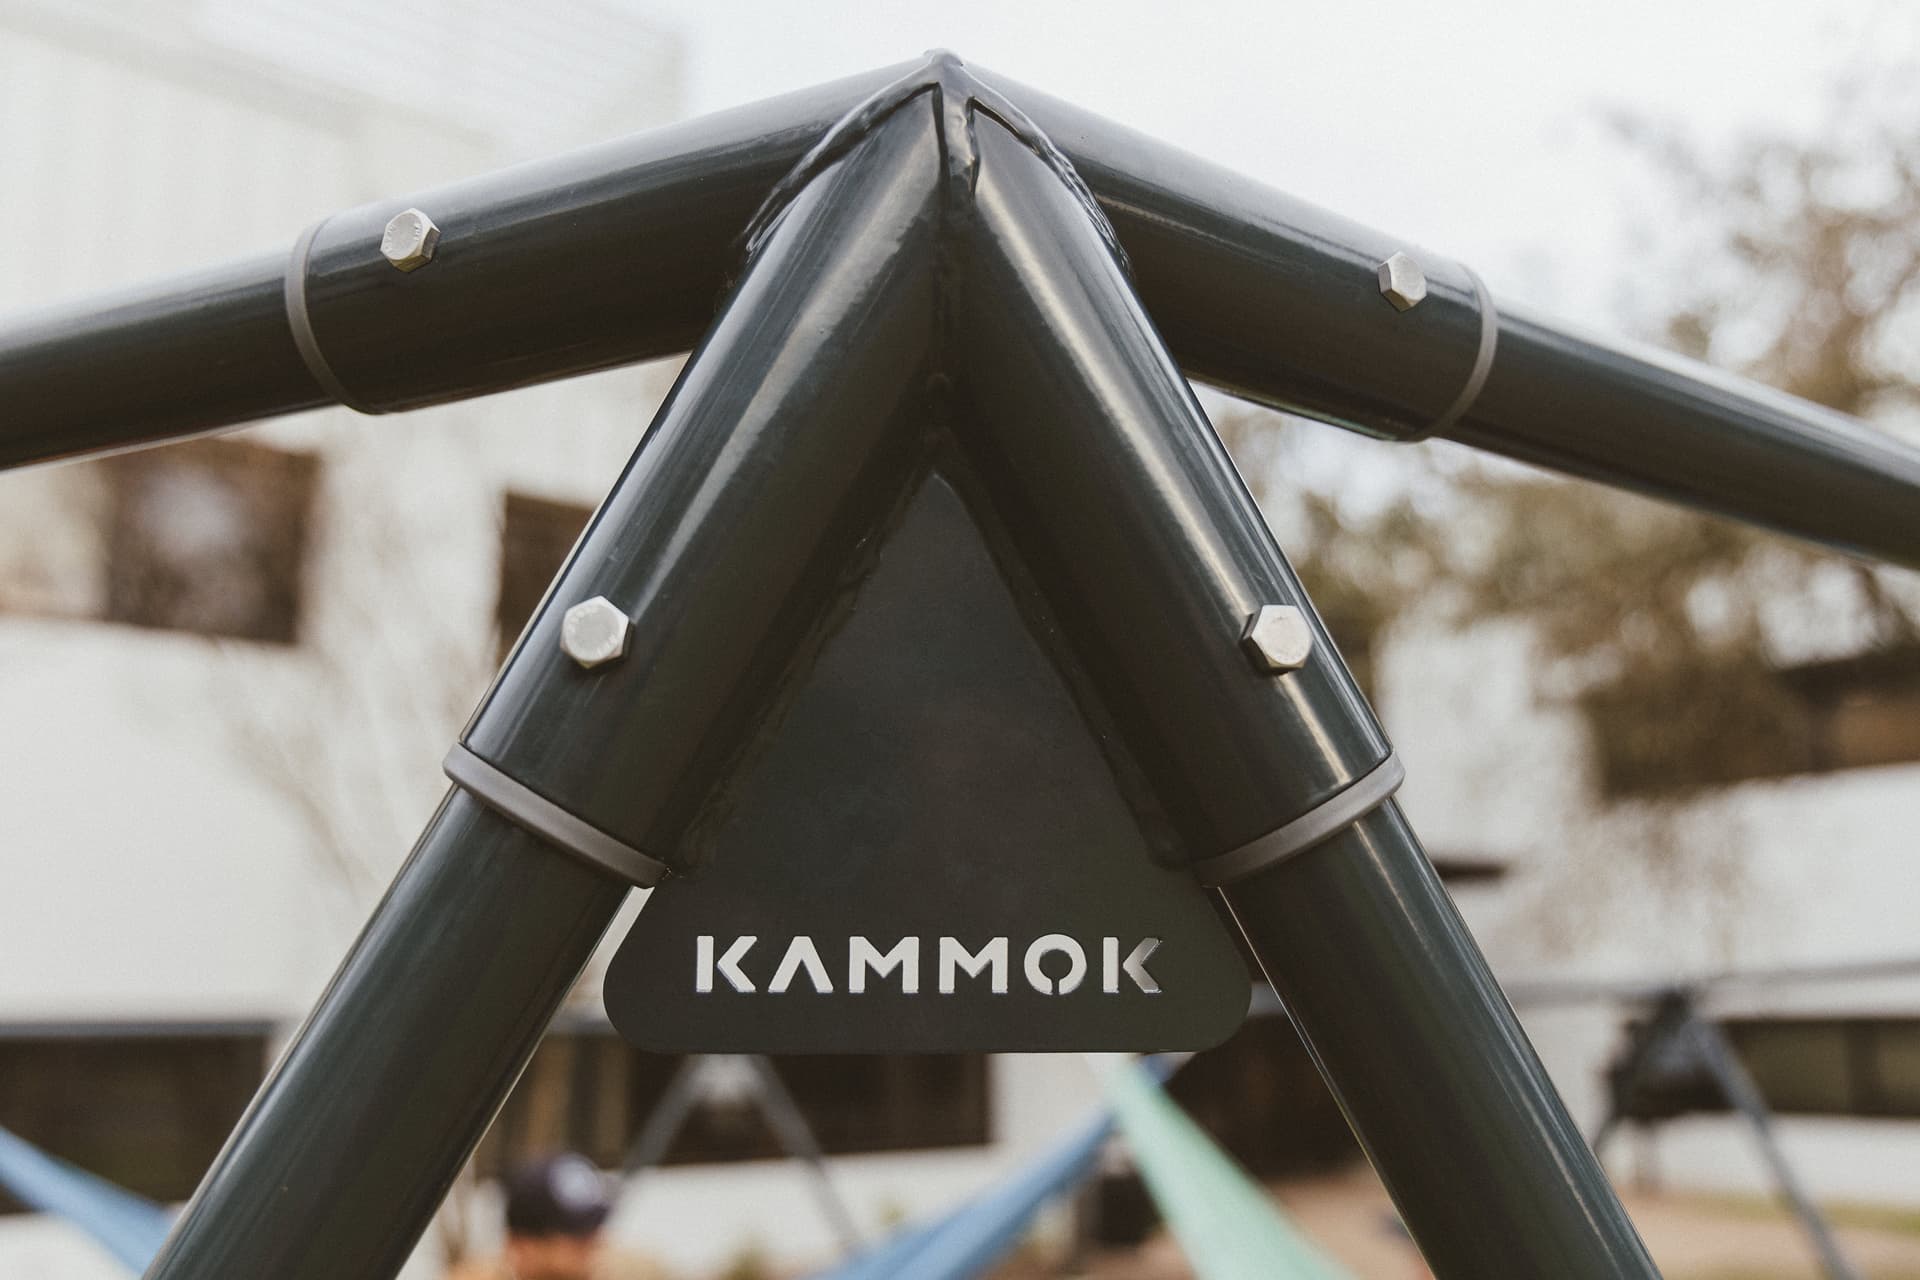 Backed by our Adventure Grade Guarantee, the Weaver is built for a lifetime of outdoor adventure — made of durable powder coated steel with a weight rating of 500 pounds per hammock.